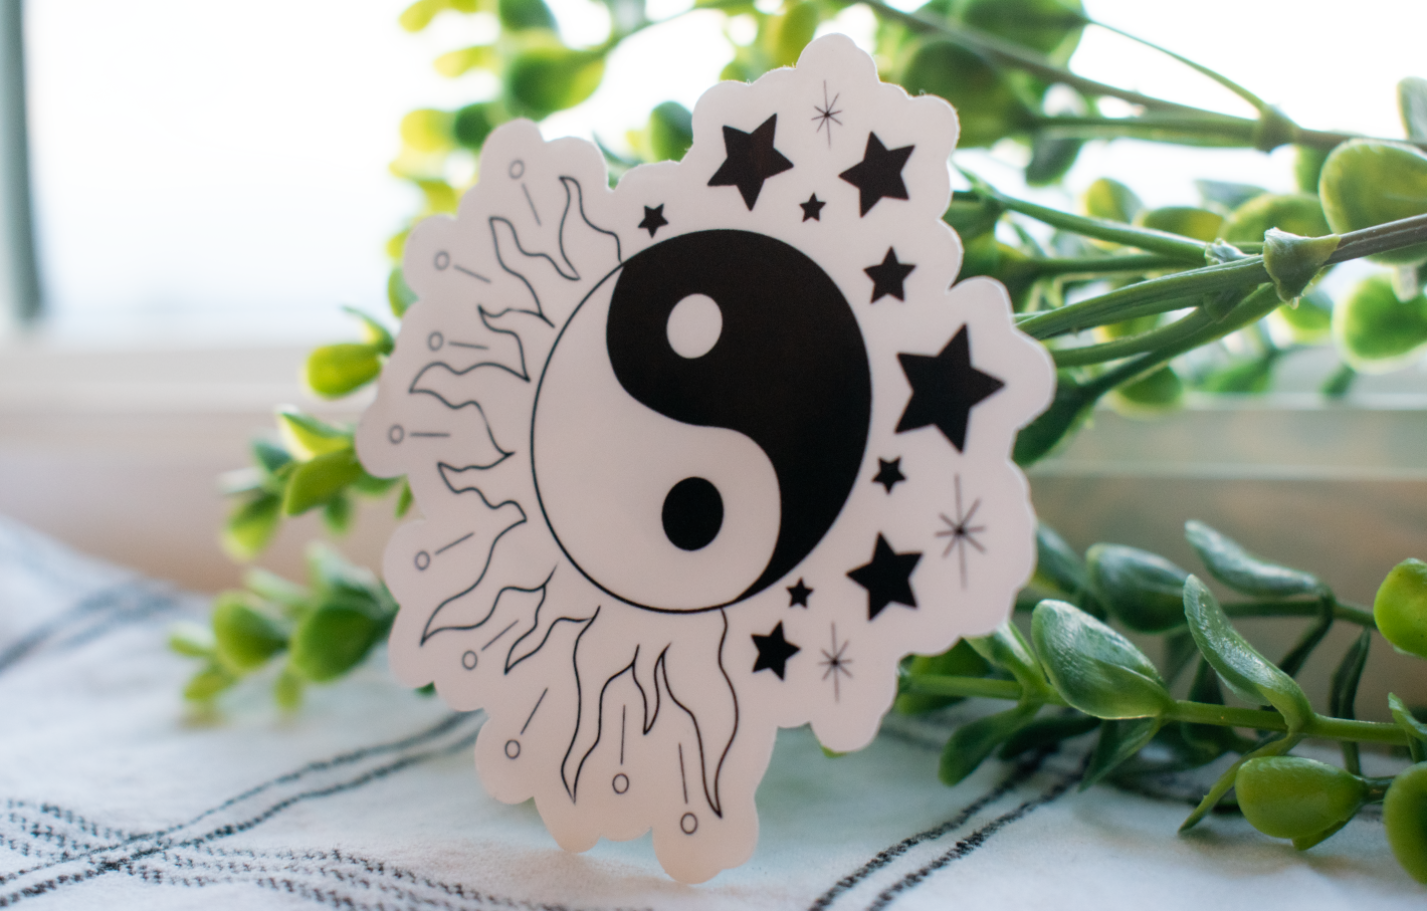 Celestial Yin & Yang Transparent Sticker Black & White | perfect gift | aesthetic stickers | transparent stickers | free shipping